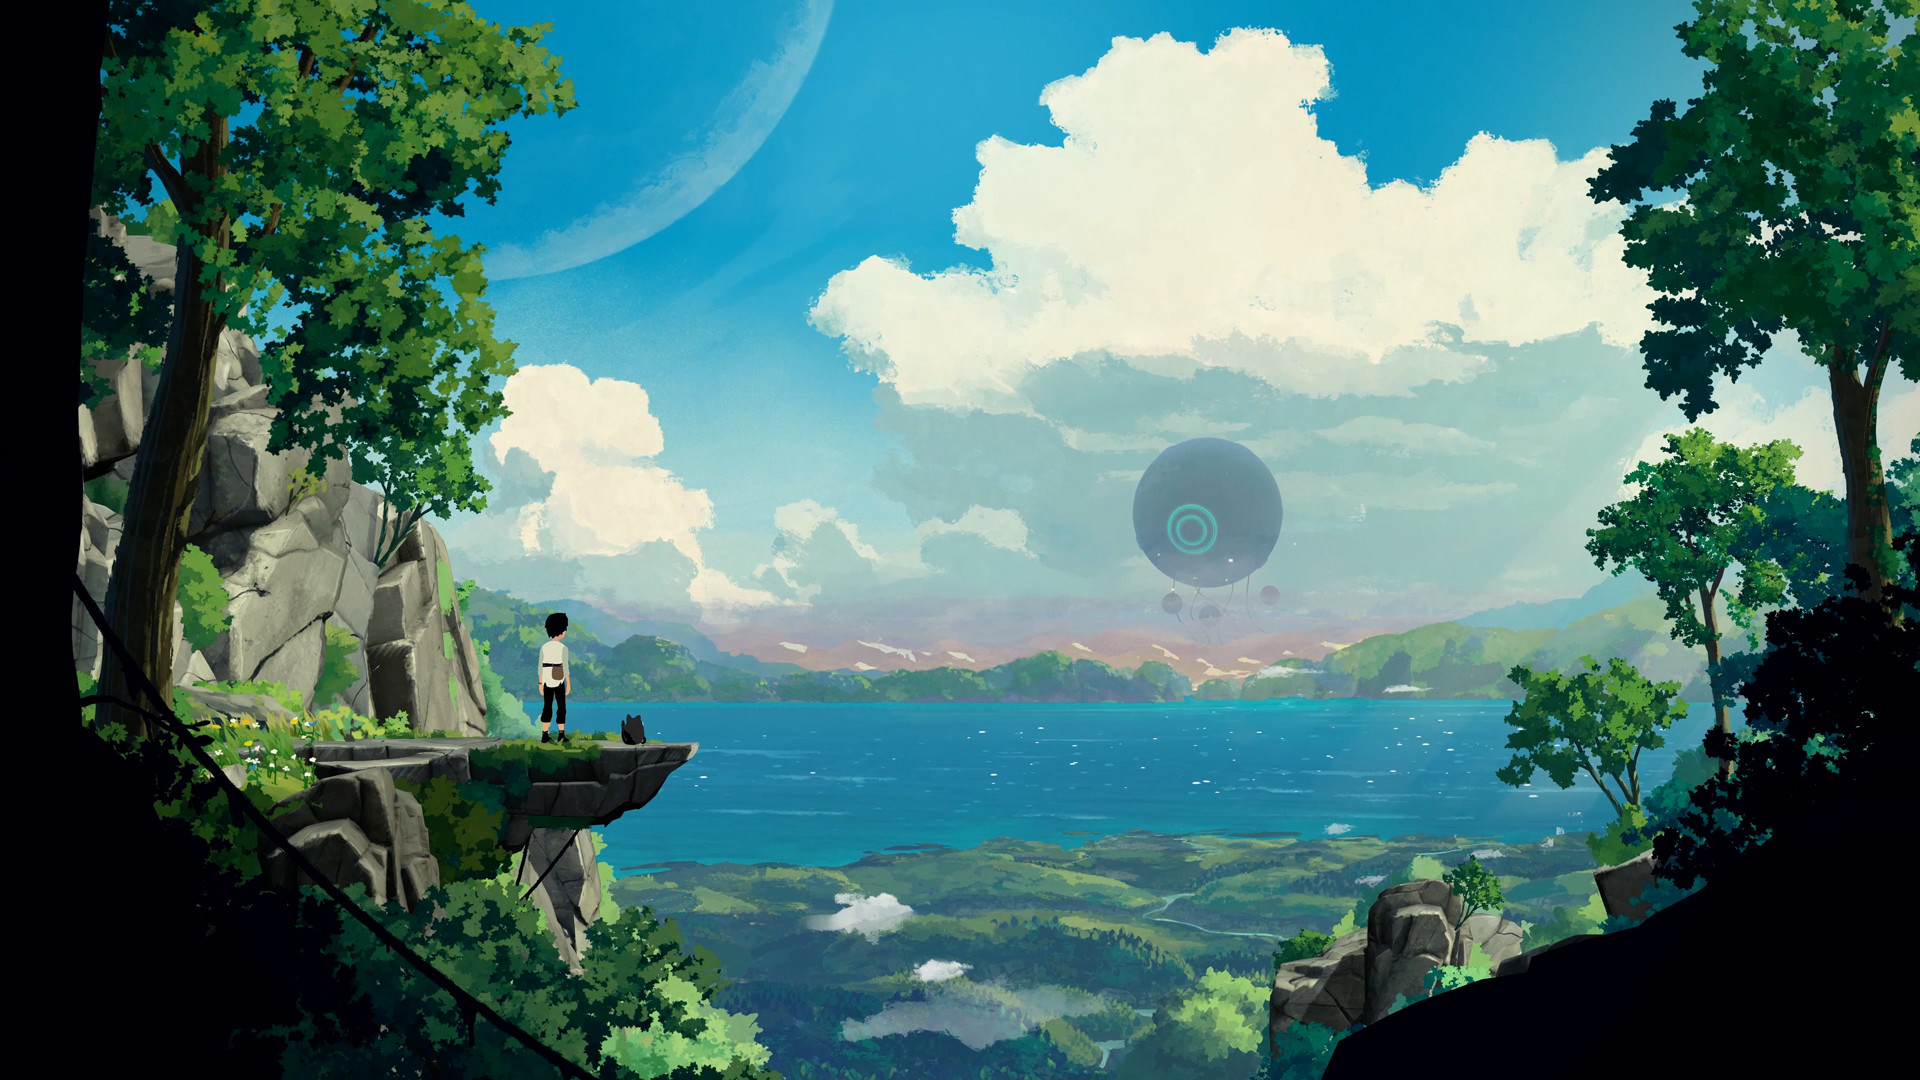 Planet of Lana platformer to be released on PlayStation and Switch on 16 April